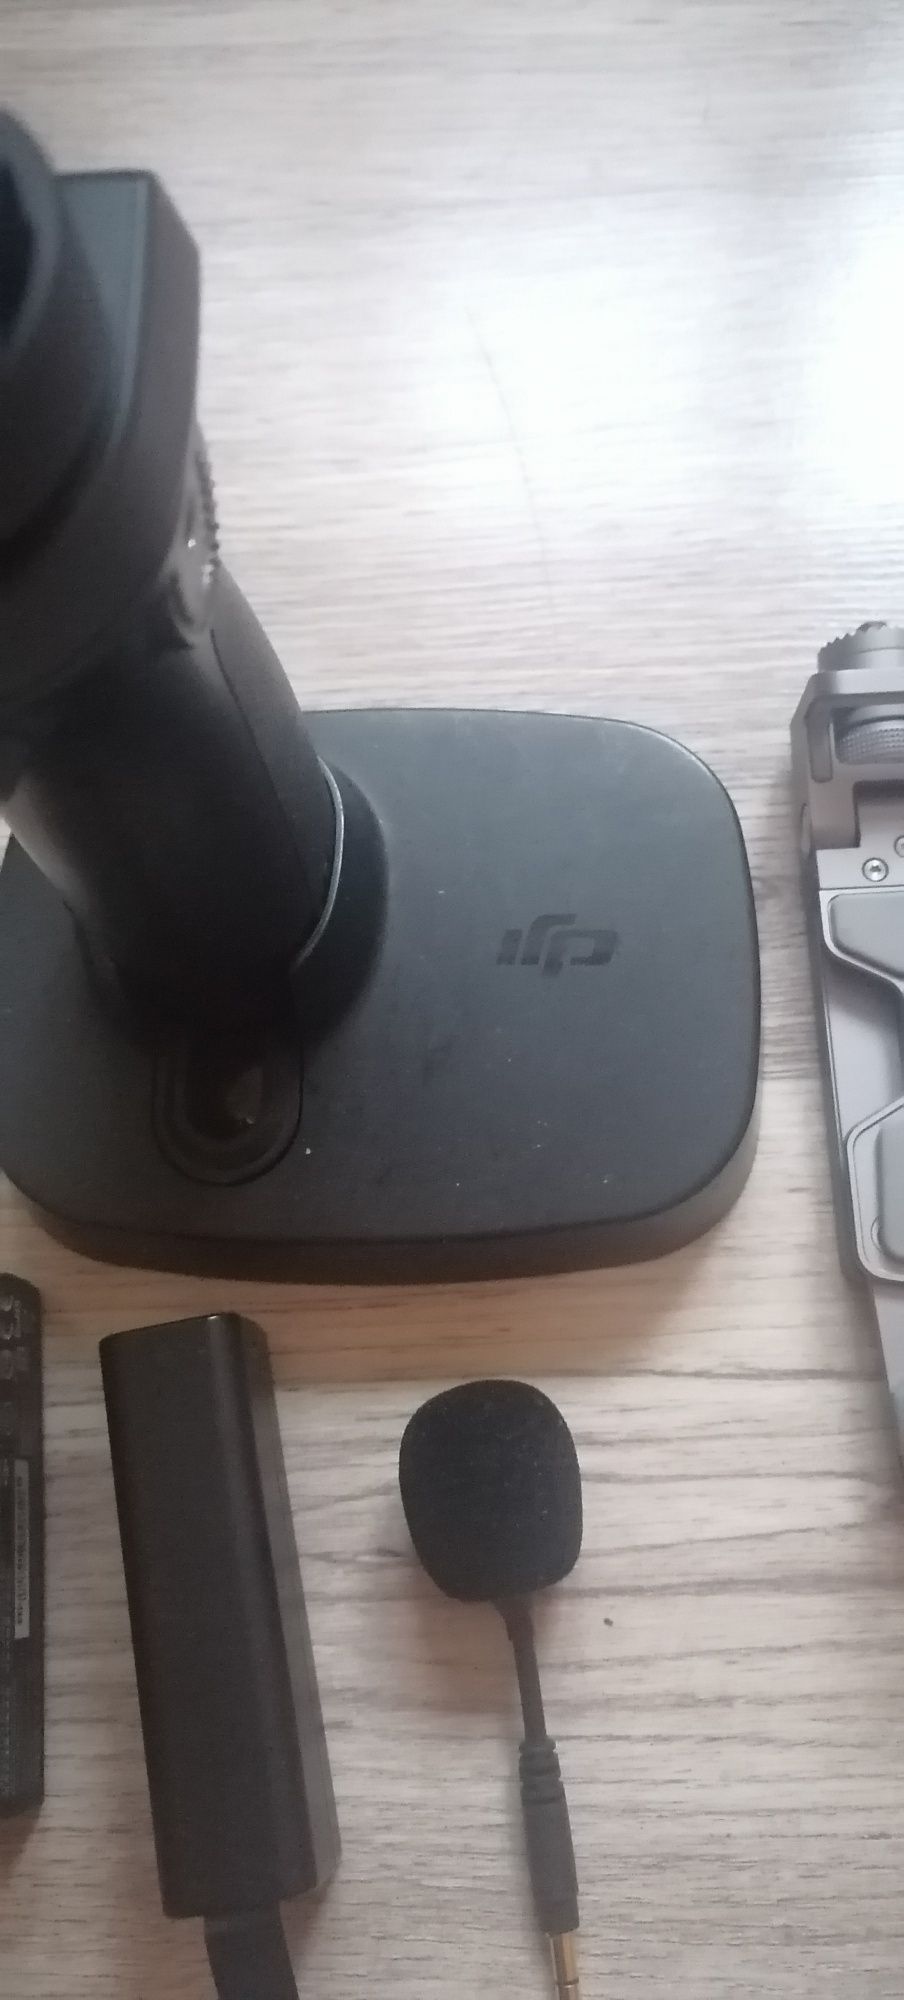 Dji osmo pachet complet